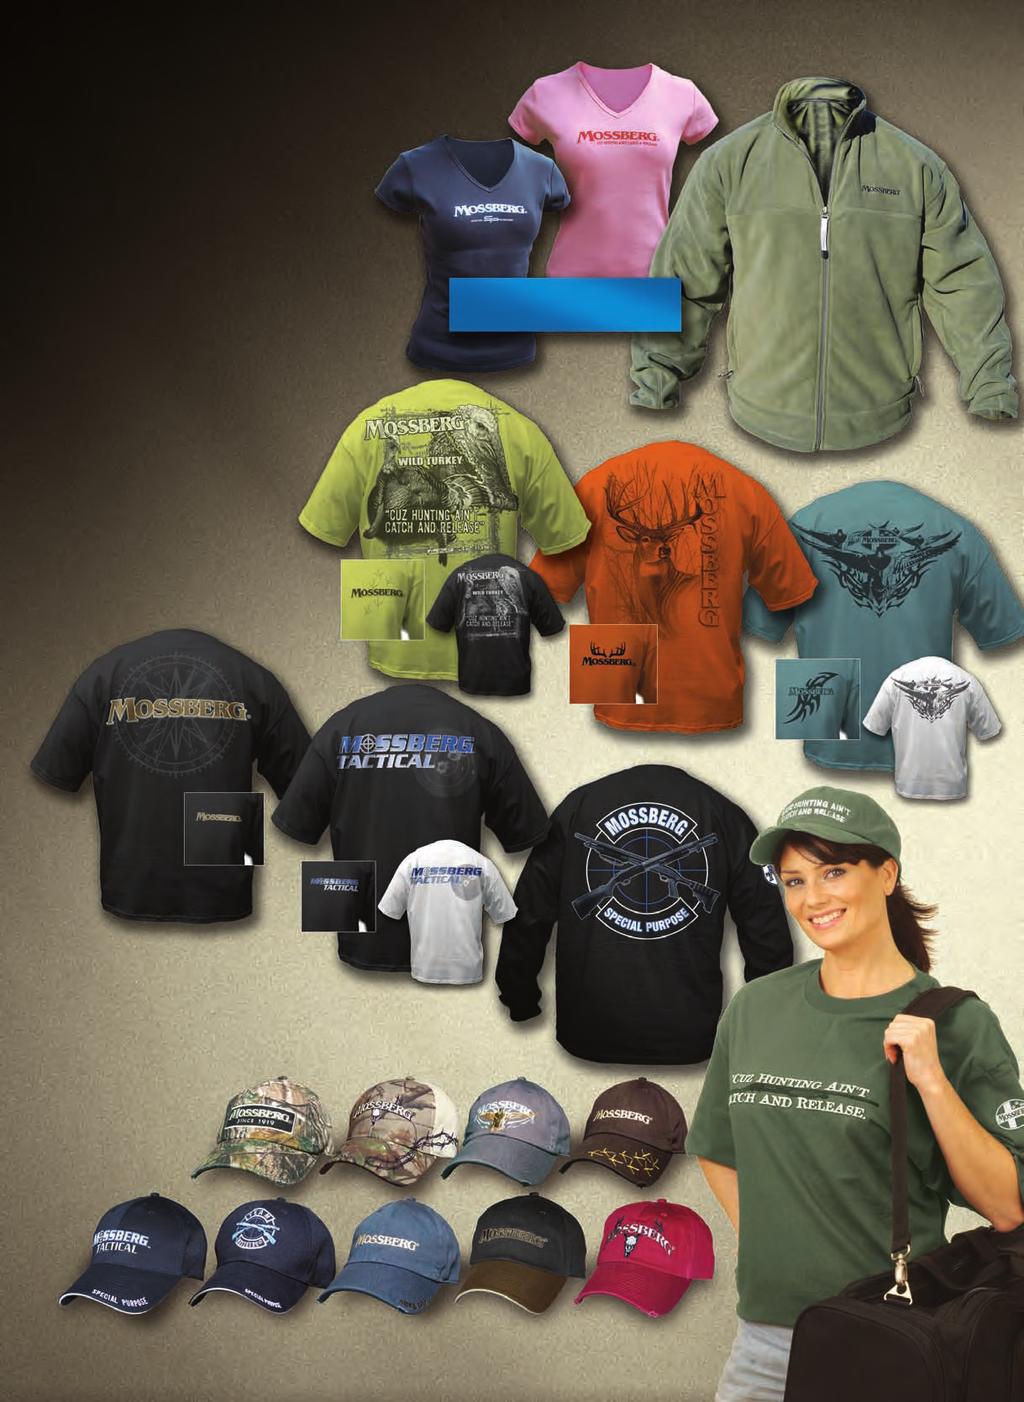 Signature Collection MOSSBERG APPAREL Perfect for a day at the range or hanging around the hunting camp, and a great way to show off your passion for hunting or shooting.